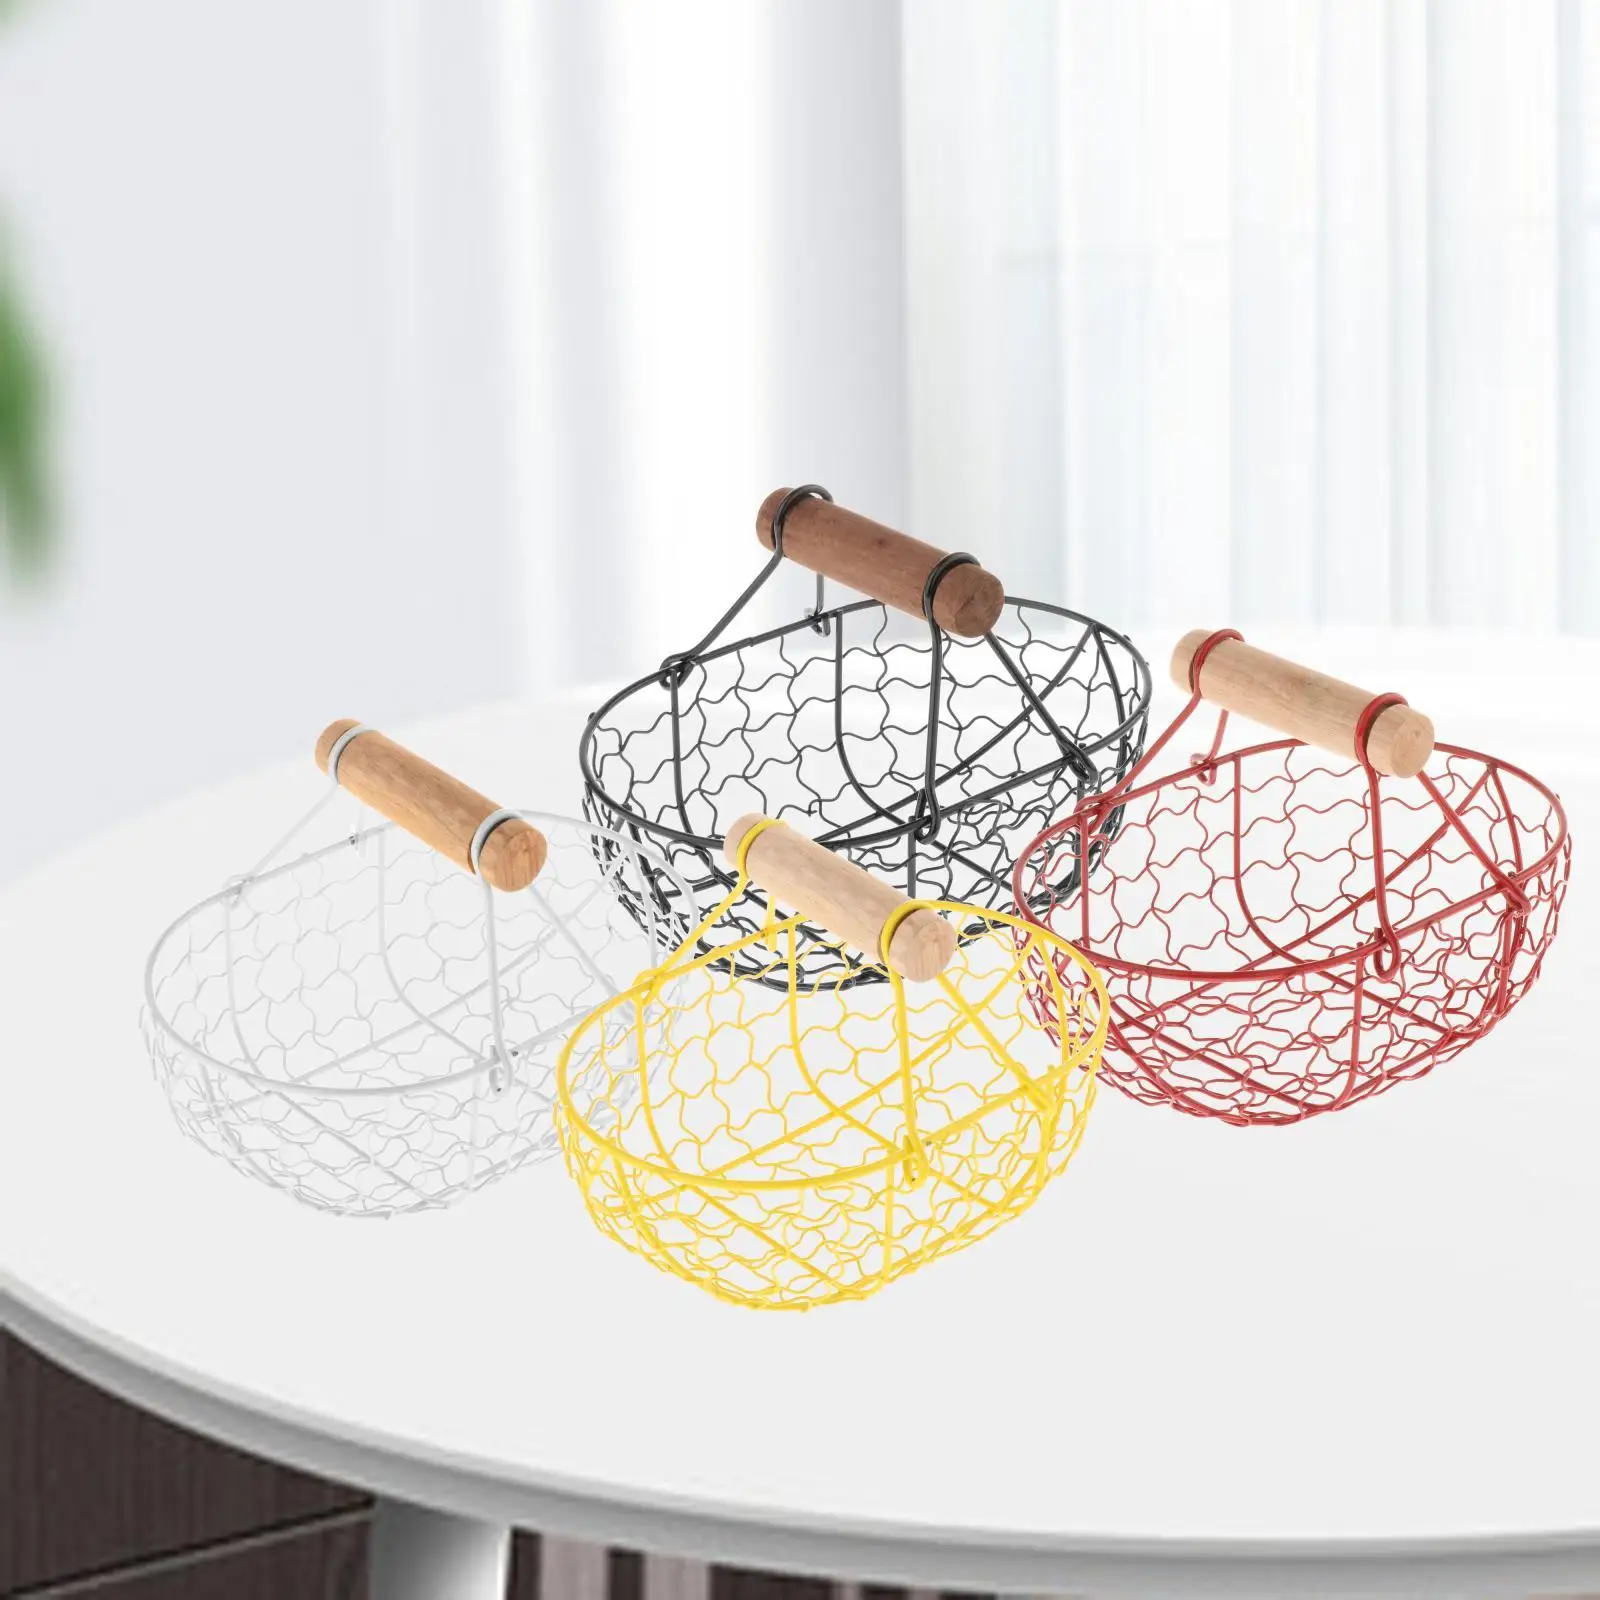 Kitchen Fruit Basket with Wooden Handle Decor Centerpieces Portable Holder Scene Layout Metal Mesh Bread Storage for Cabinet